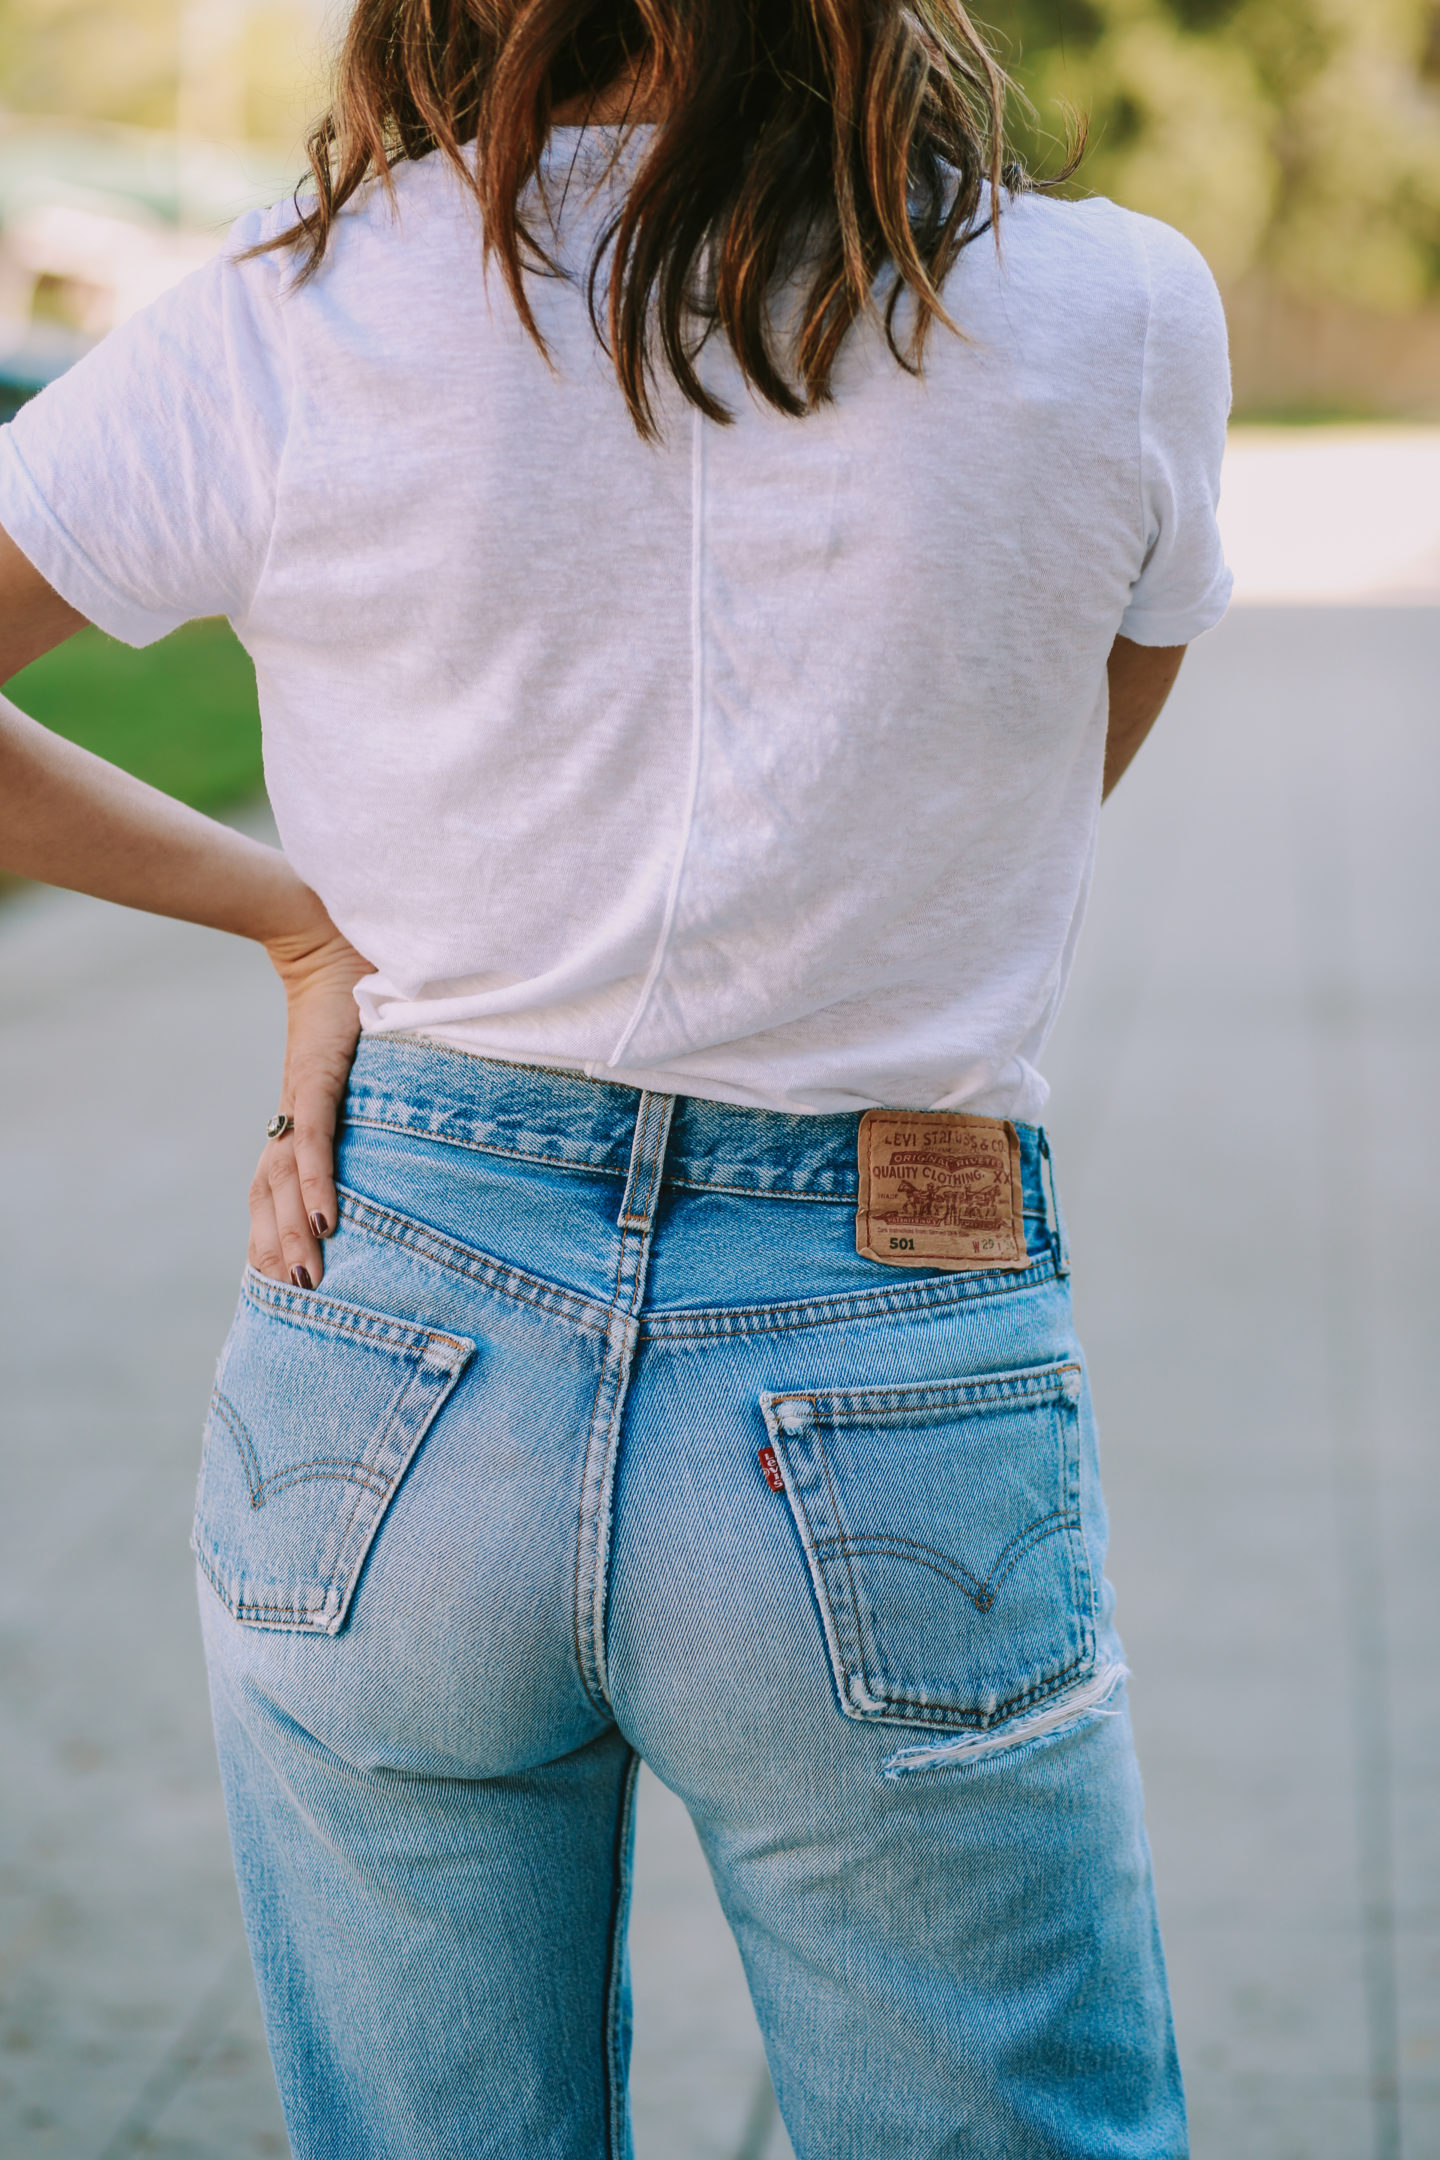 The Ultimate Guide to Vintage Levi's: Styles and Where to Buy Them